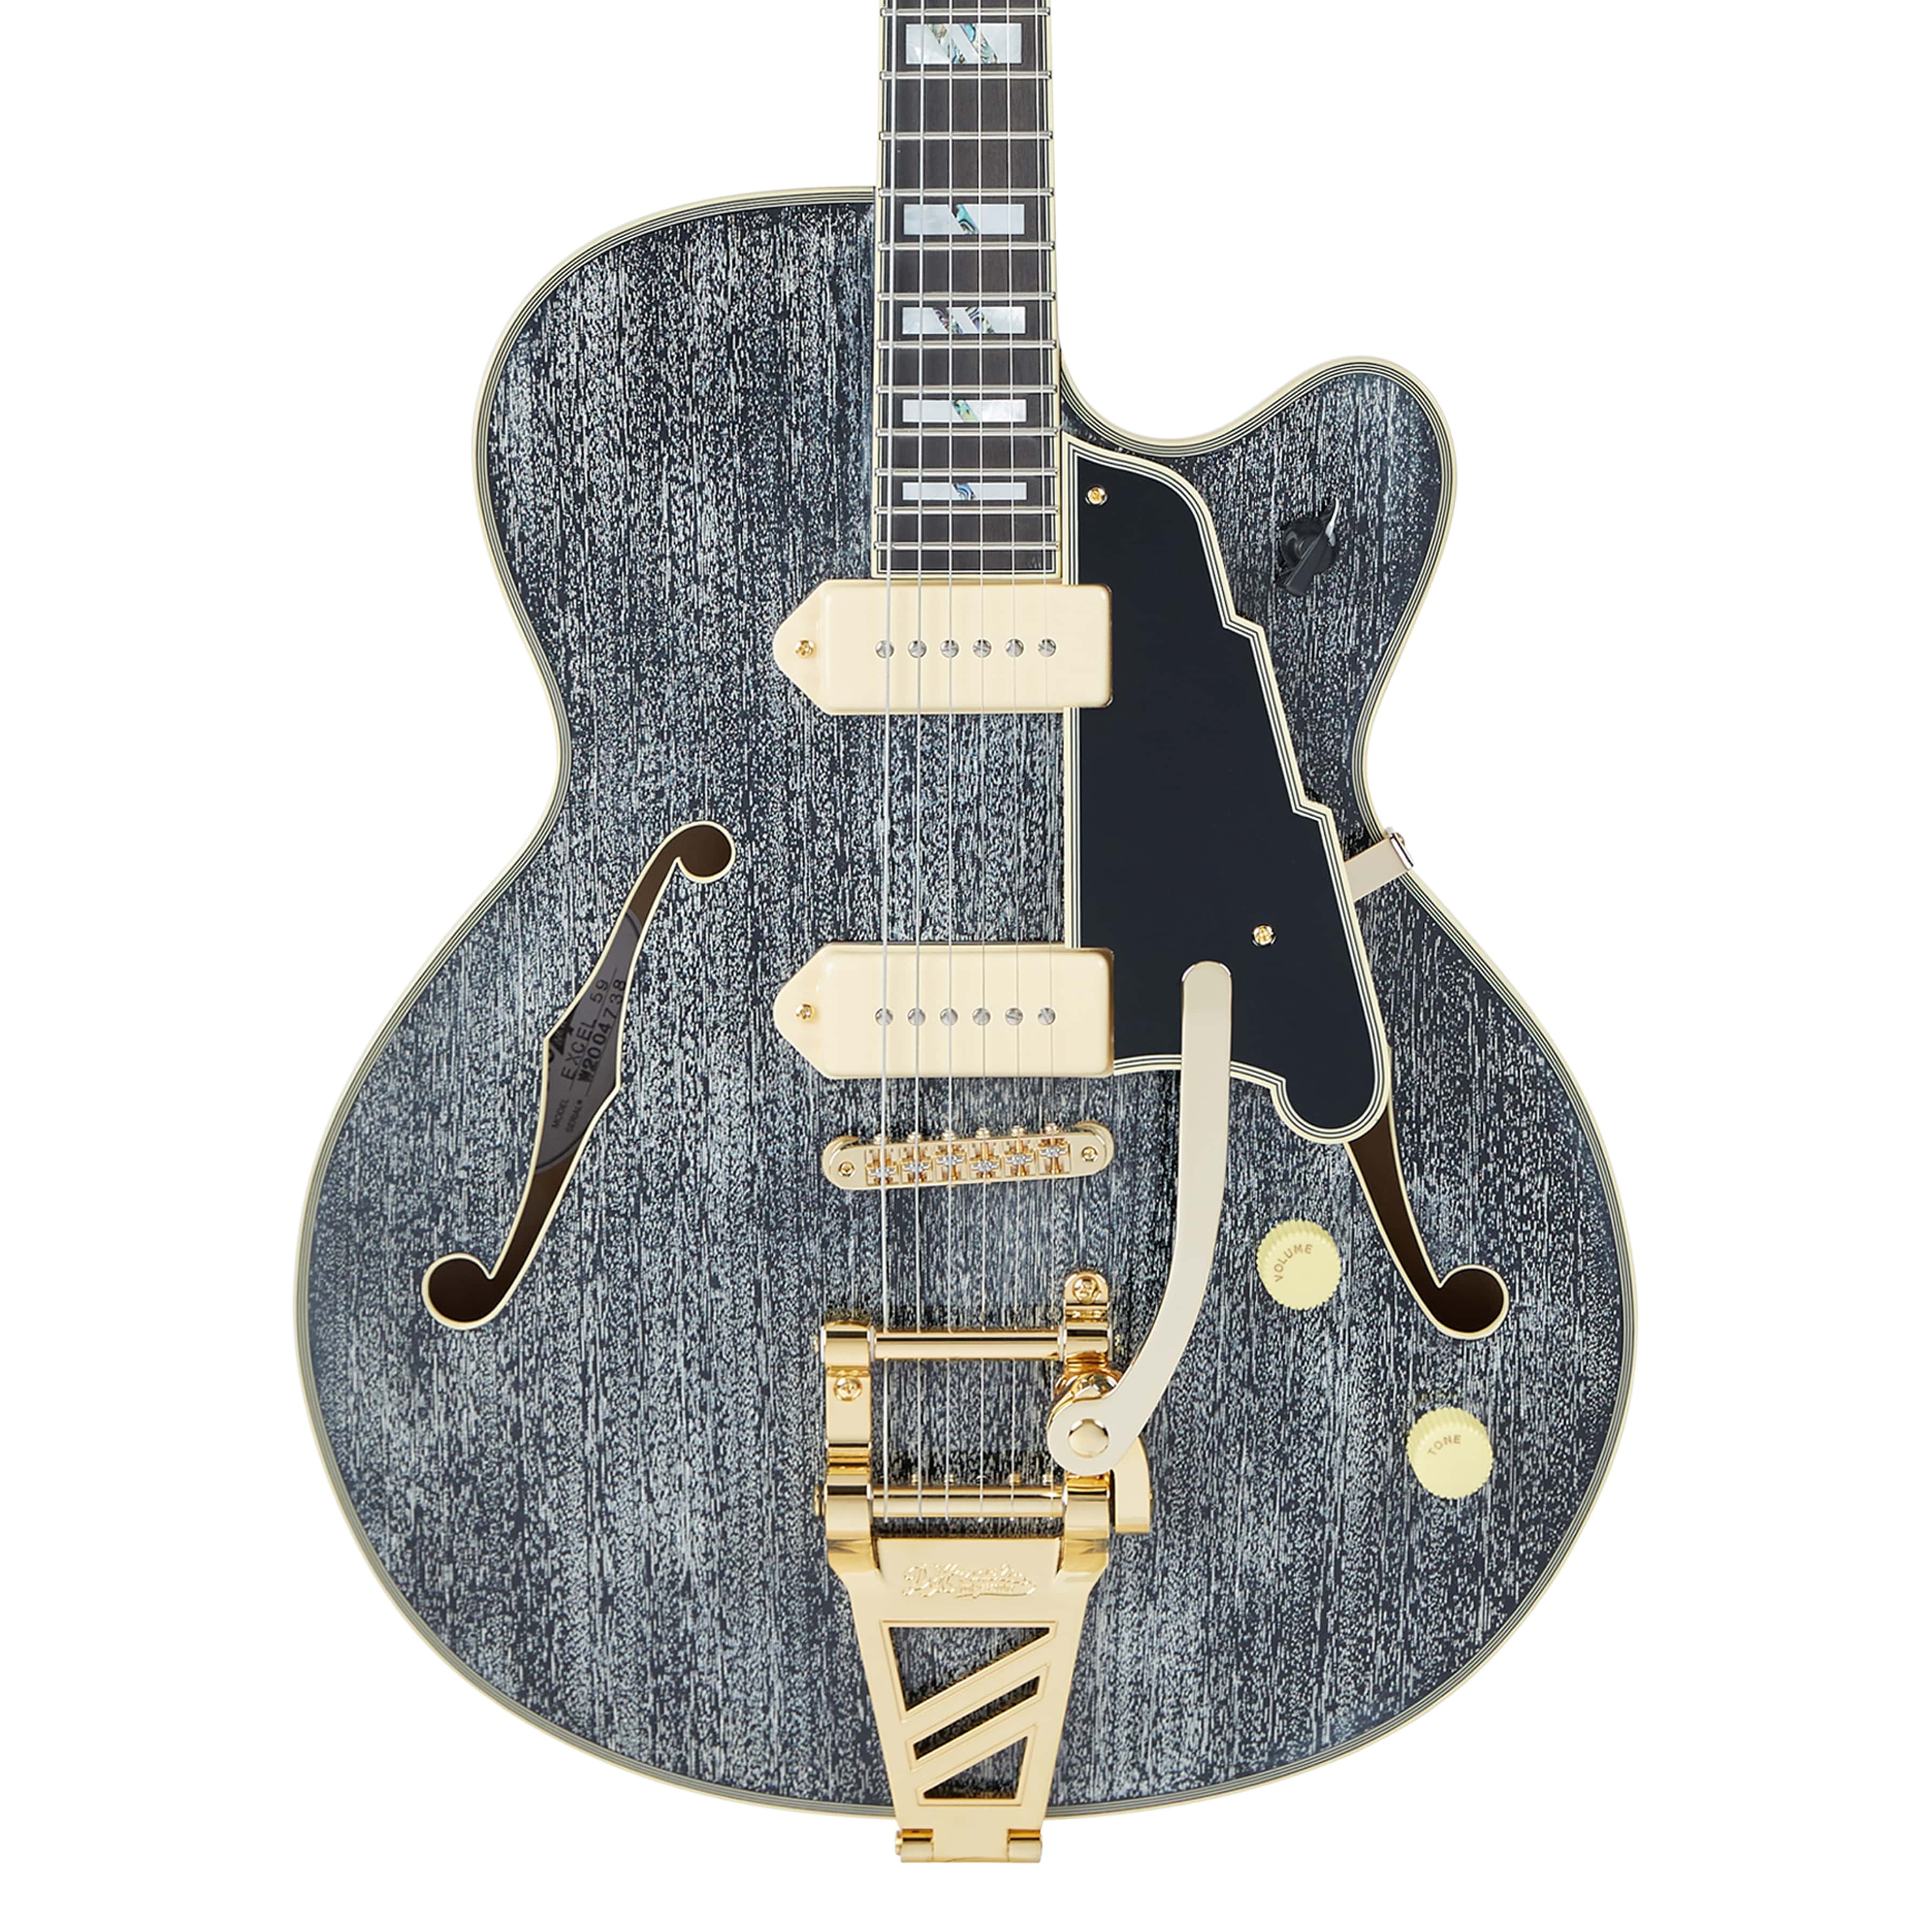 D'Angelico Excel 59 Hollowbody Electric Guitar With Shield Tremolo Black Dog DAE59BDGTR